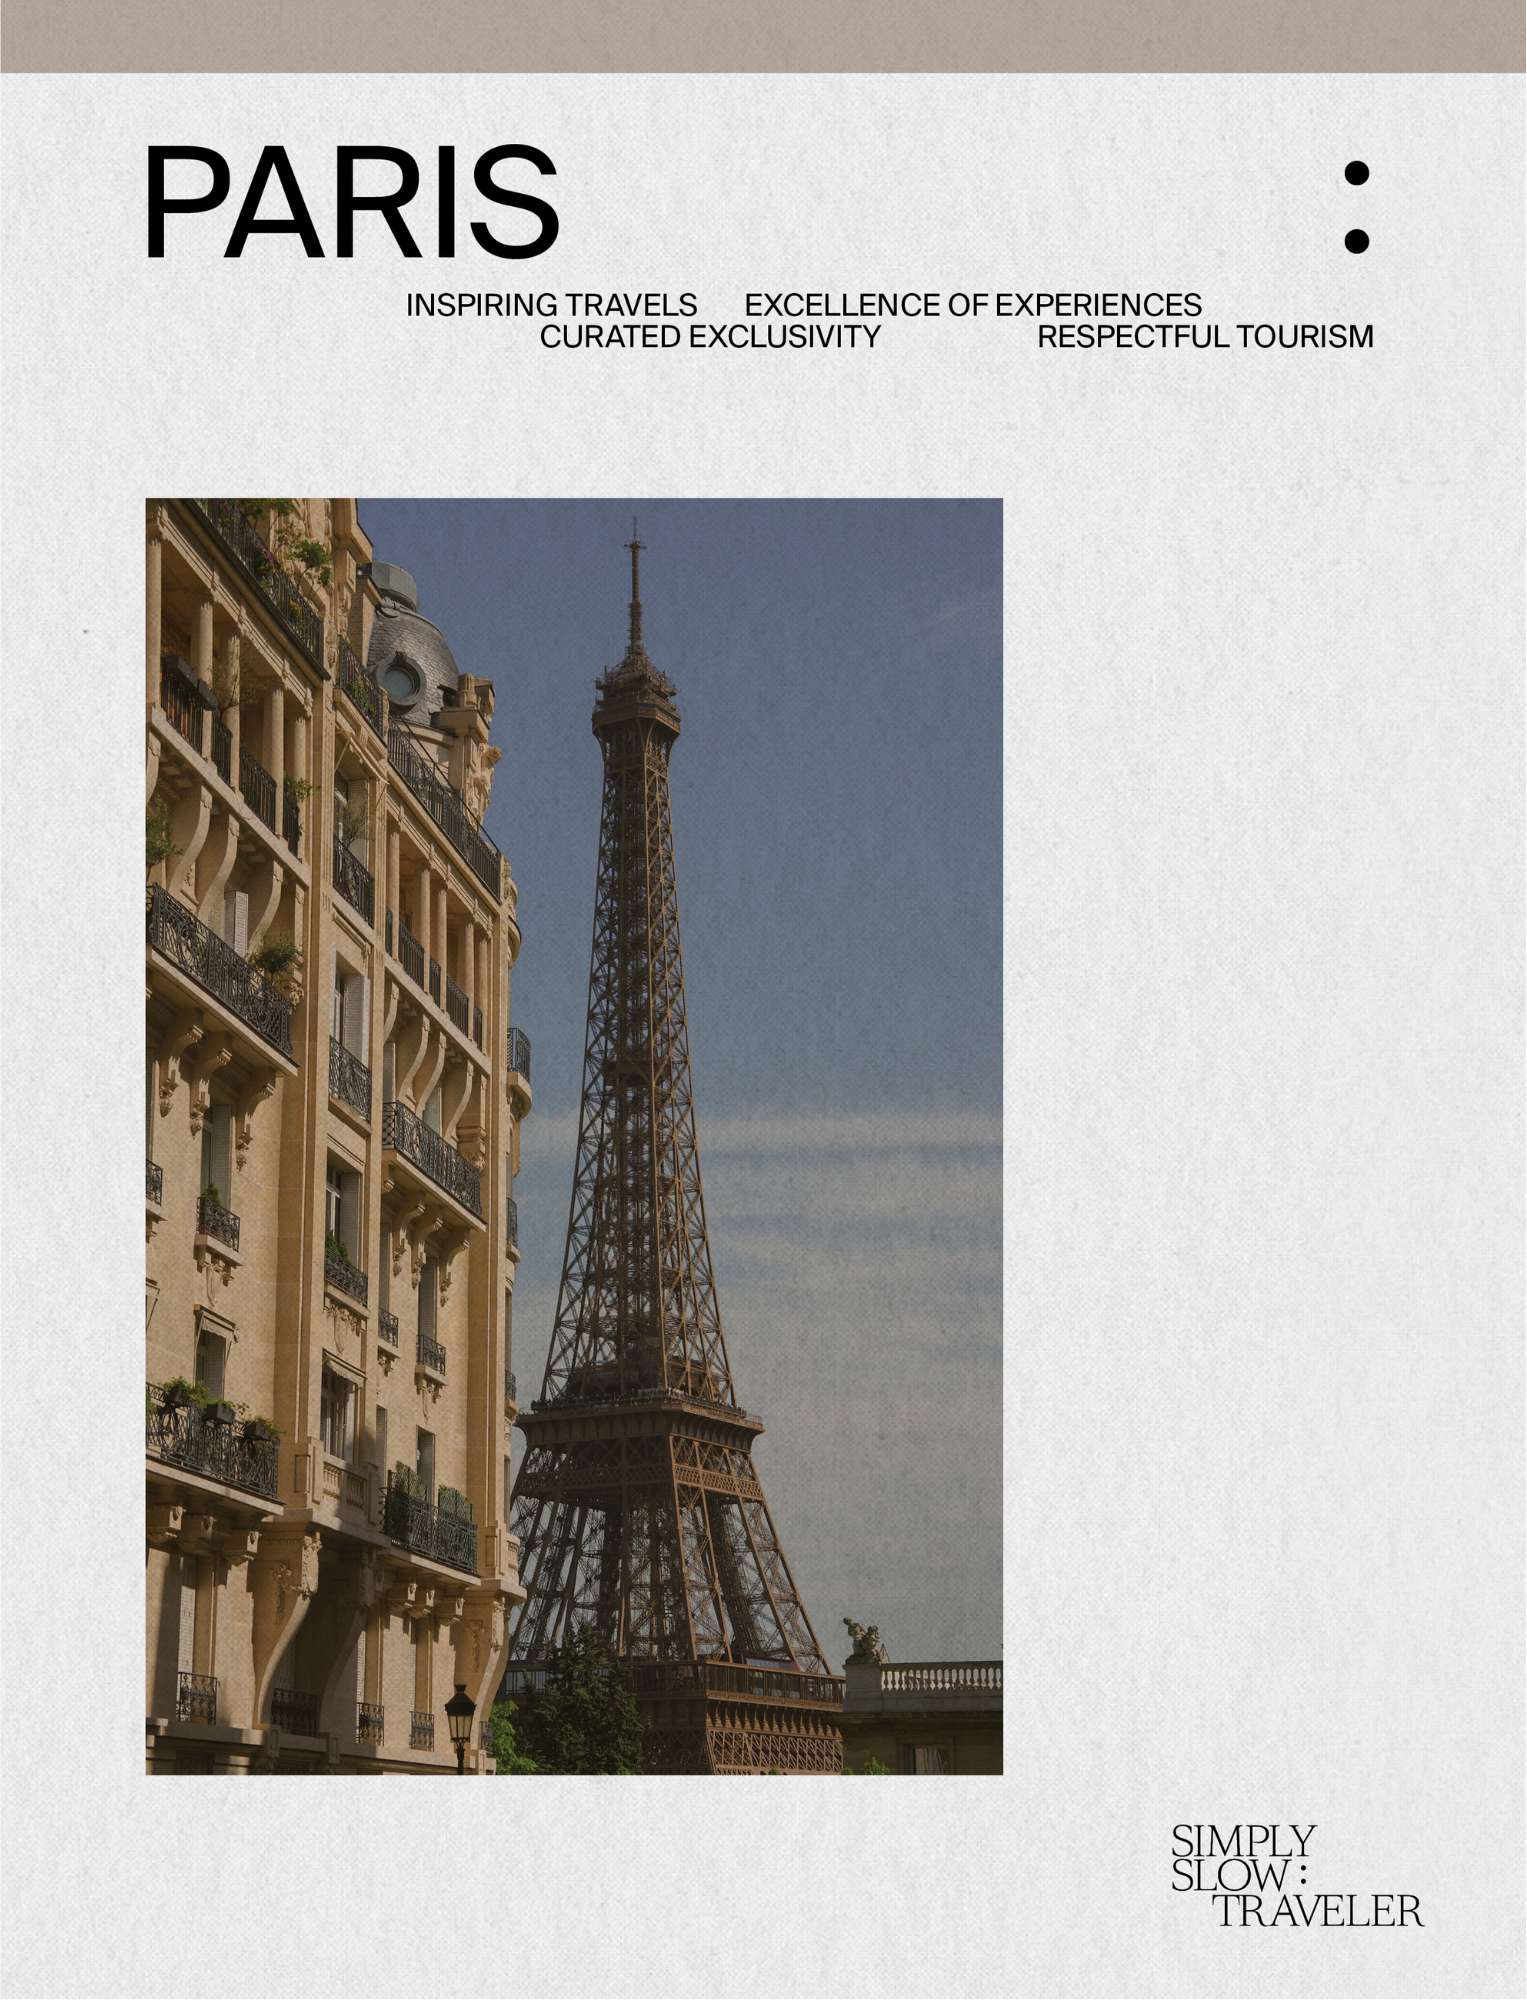 A Guide to Paris - Cover Page, by Simply Slow Traveler